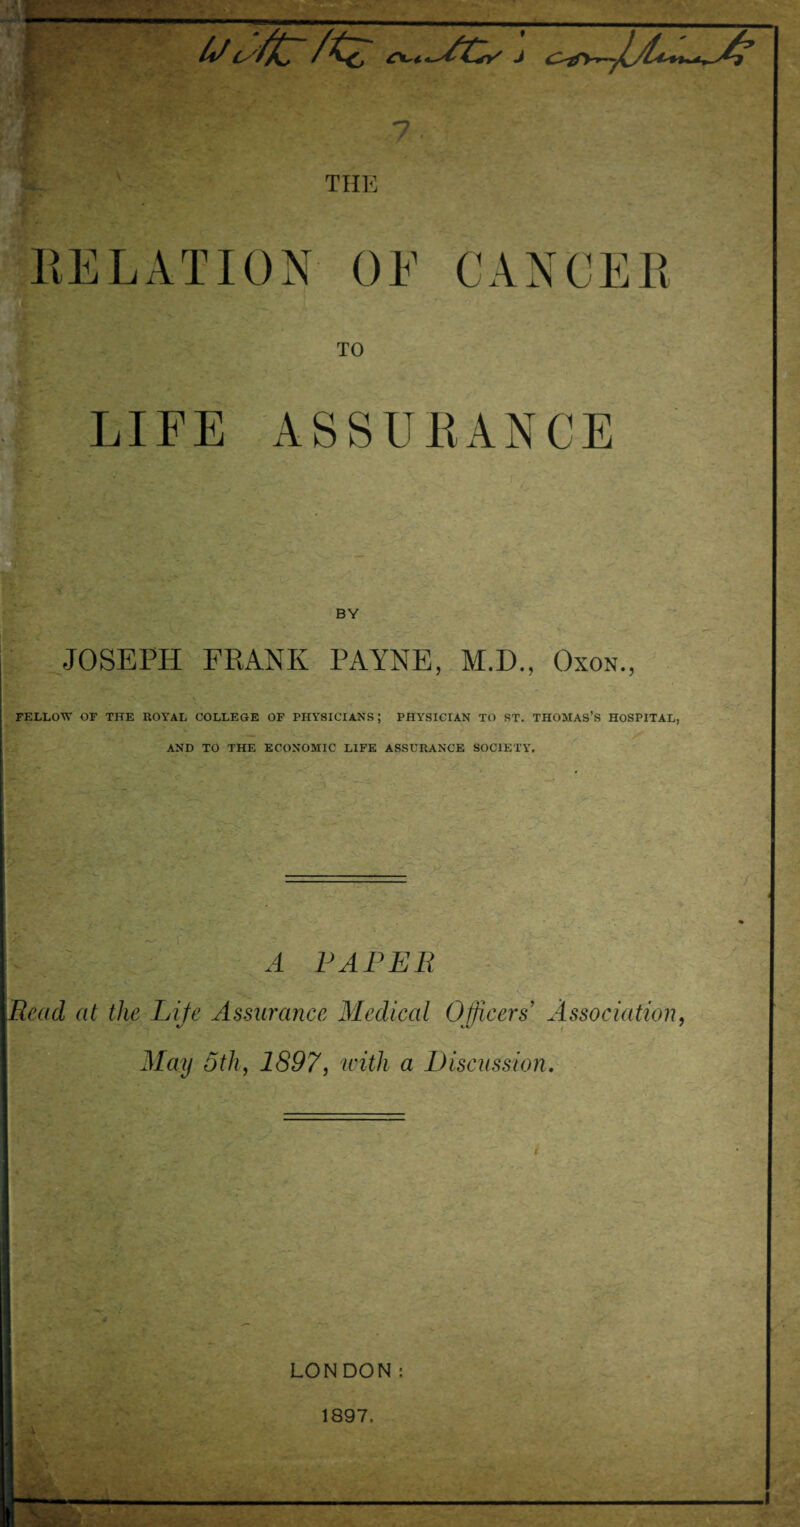 —. SCs J 7 THE RELATION OF CANCER TO LIFE ASSURANCE ... BY JOSEPH FRANK PAYNE, M.D., Oxon., FELLOW OF THE ROYAL COLLEGE OF PHYSICIANS; PHYSICIAN TO ST. THOMAS’S HOSPITAL, AND TO THE ECONOMIC LIFE ASSURANCE SOCIETY. A PAPER Read at the Life Assurance Medical Officers Association, May 5th, 1897, with a Discussion. LONDON: 1897.